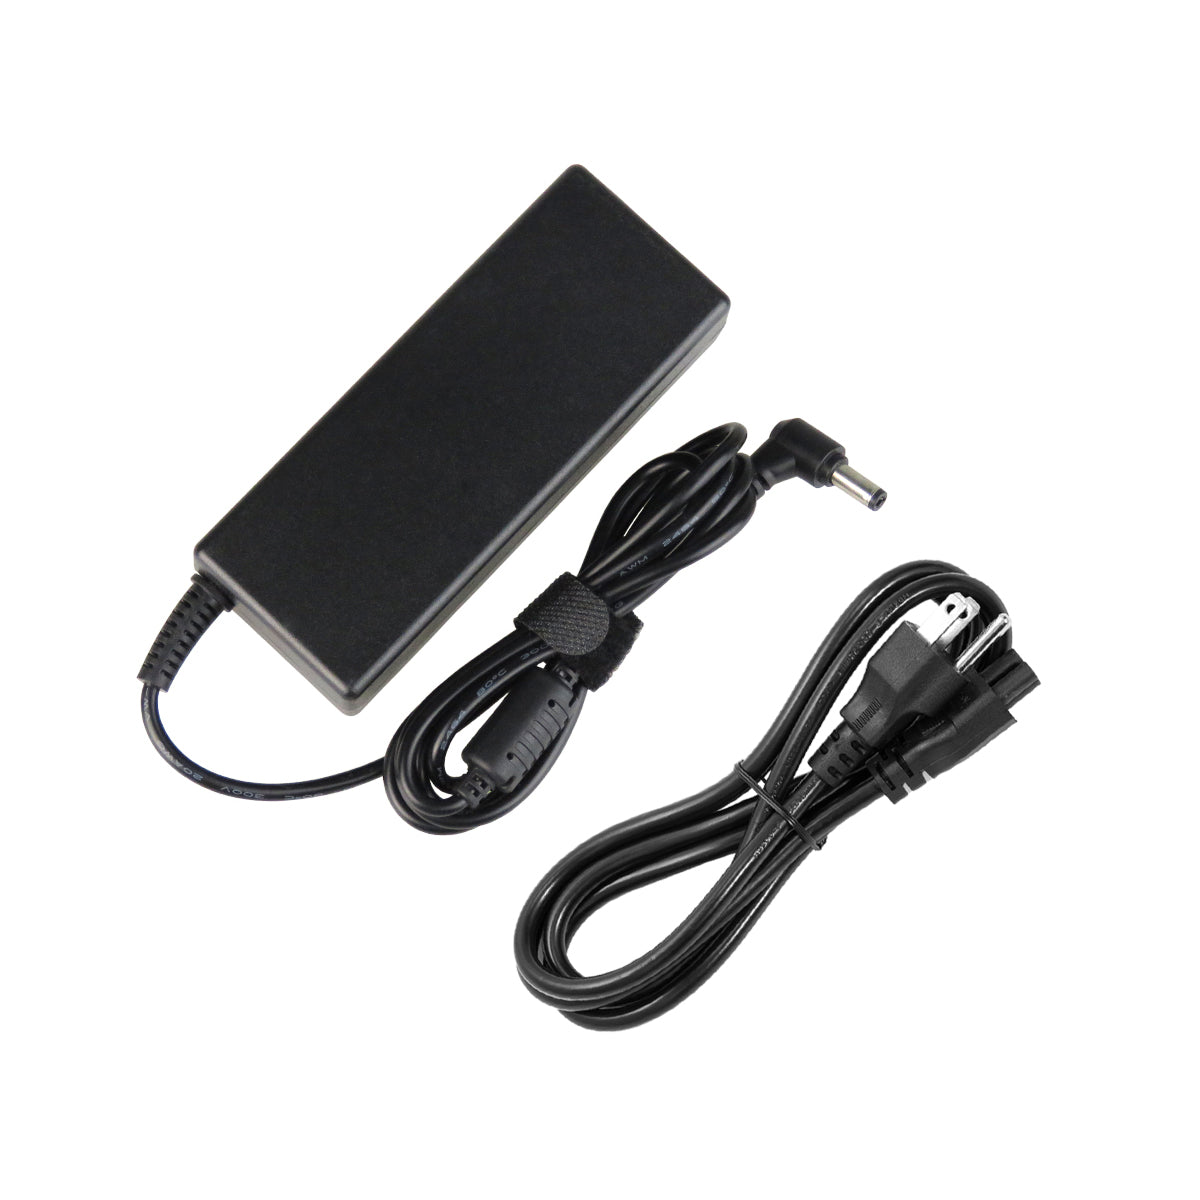 AC Adapter Charger for ASUS X52DE Notebook.